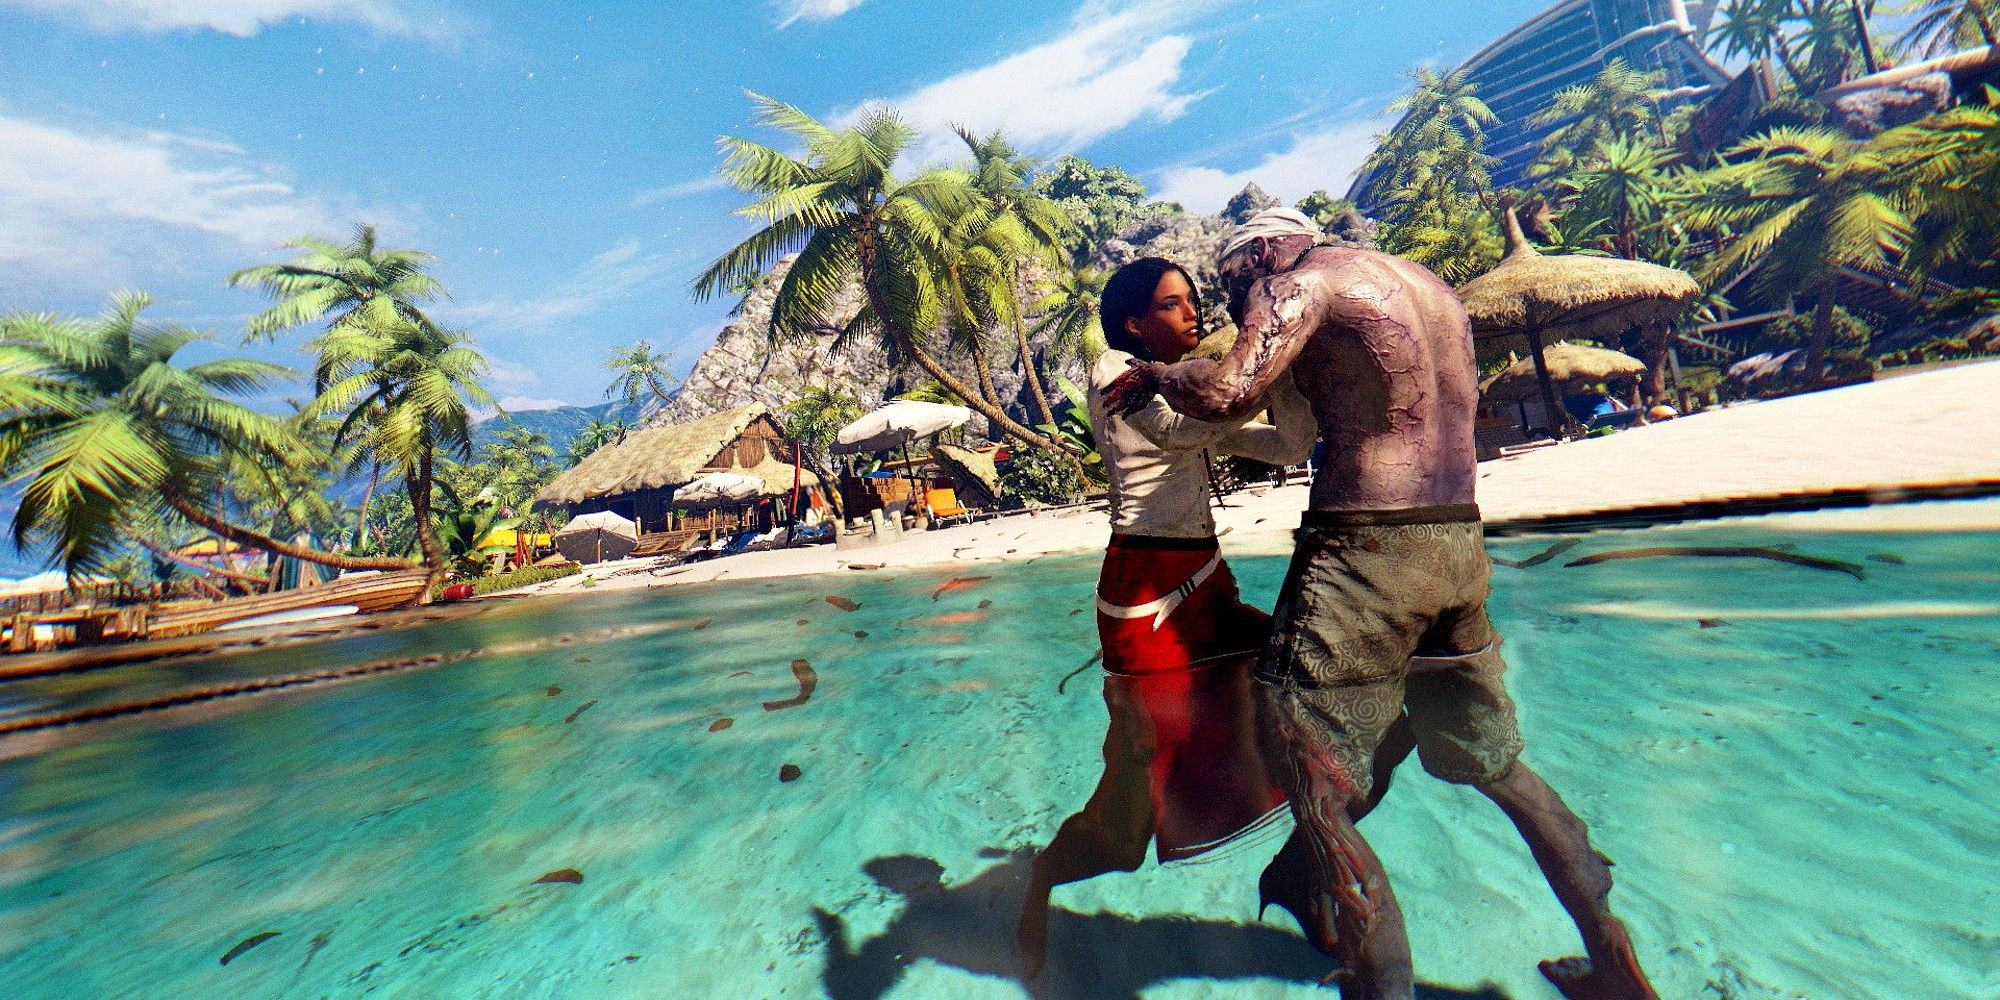 Dead Island Zombie Attacks Woman In Shallow Waters